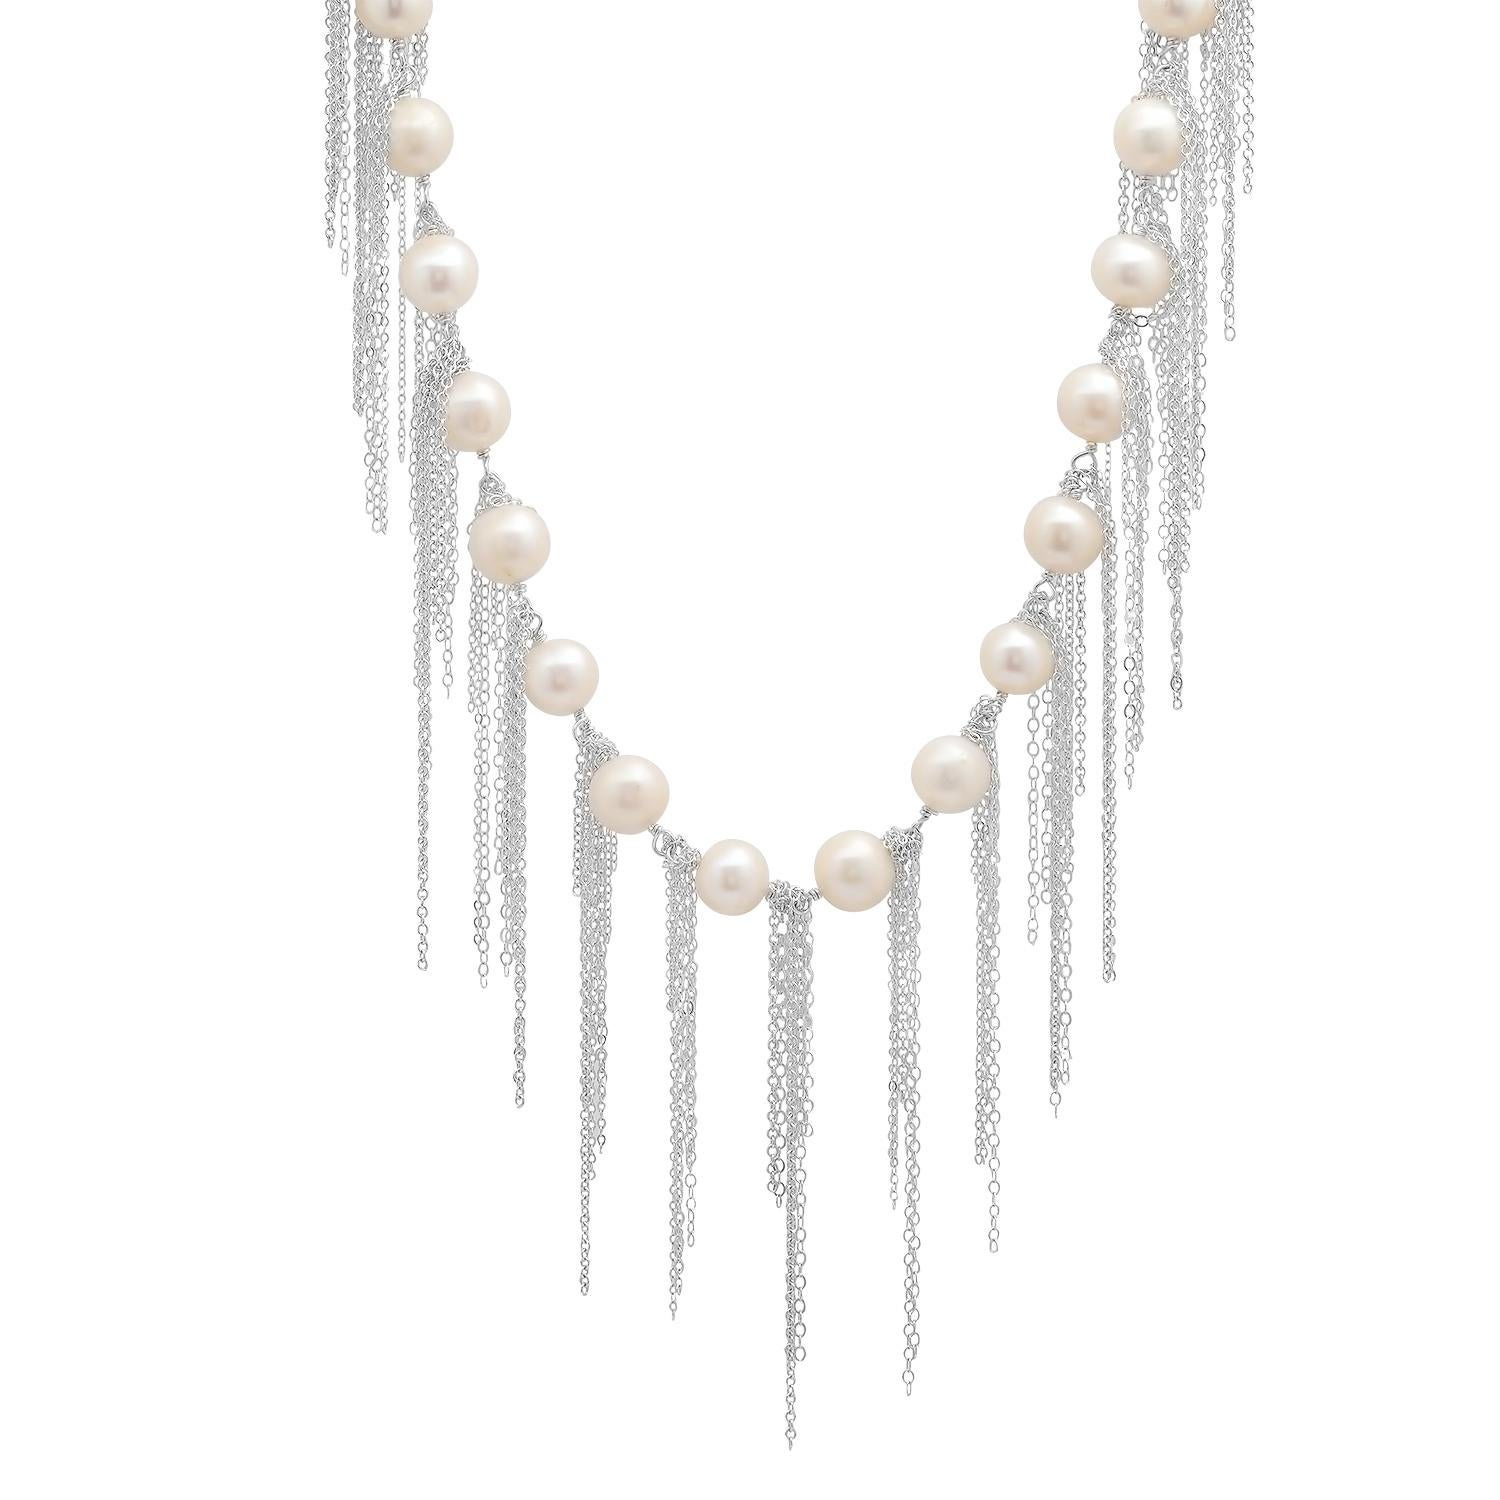 Signature white freshwater pearl fringe necklace by Los Angeles based fine jewelry designer, Samira 13. Sterling silver chain. Can be worn many ways.

Exploring the unique and varied aspects of pearls is the cornerstone of Samira 13